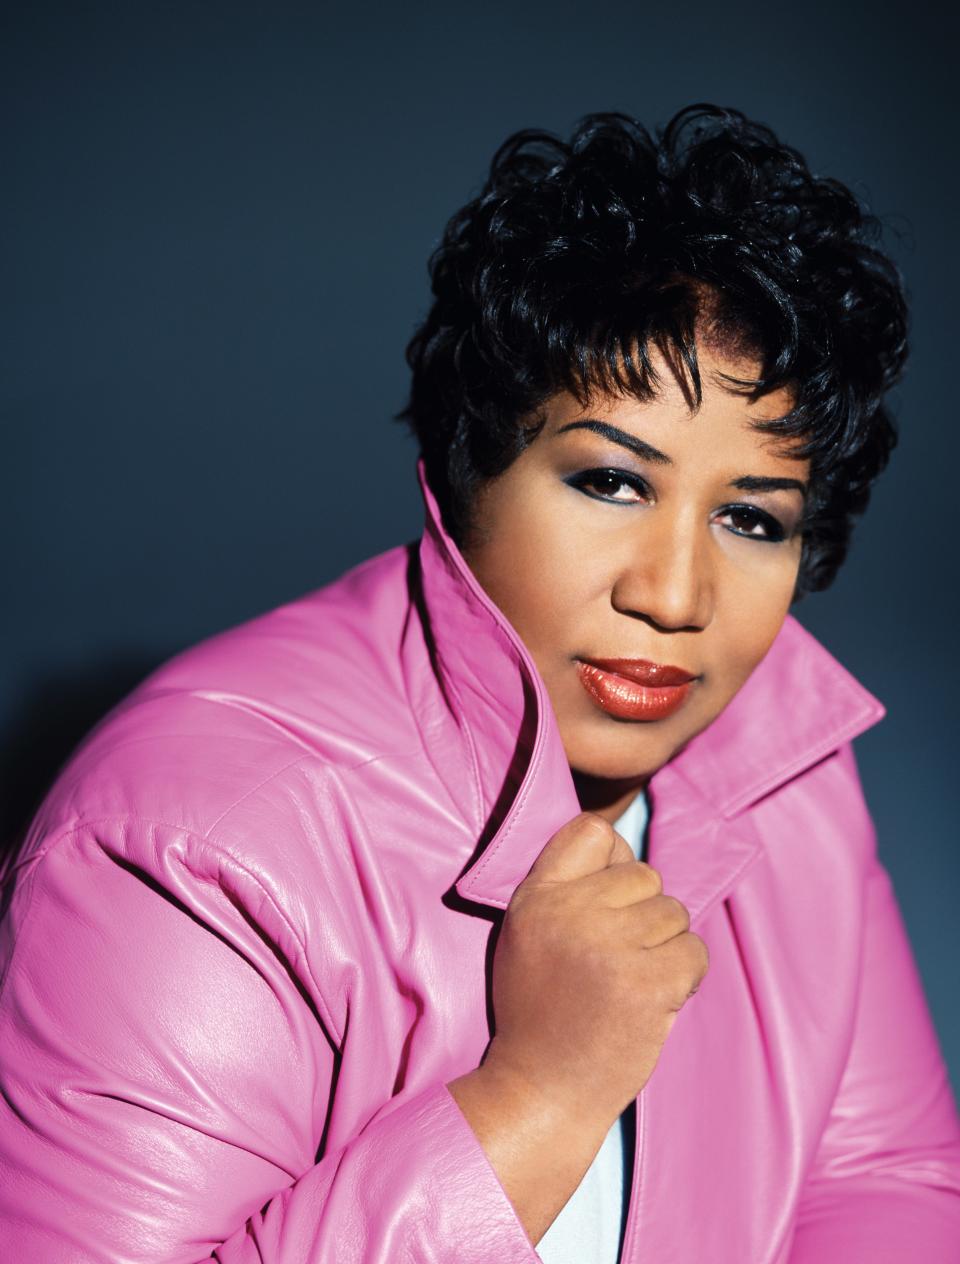 Aretha Franklin is pictured during a Detroit photo shoot by Matthew Jordan Smith. From the book "Aretha Cool."